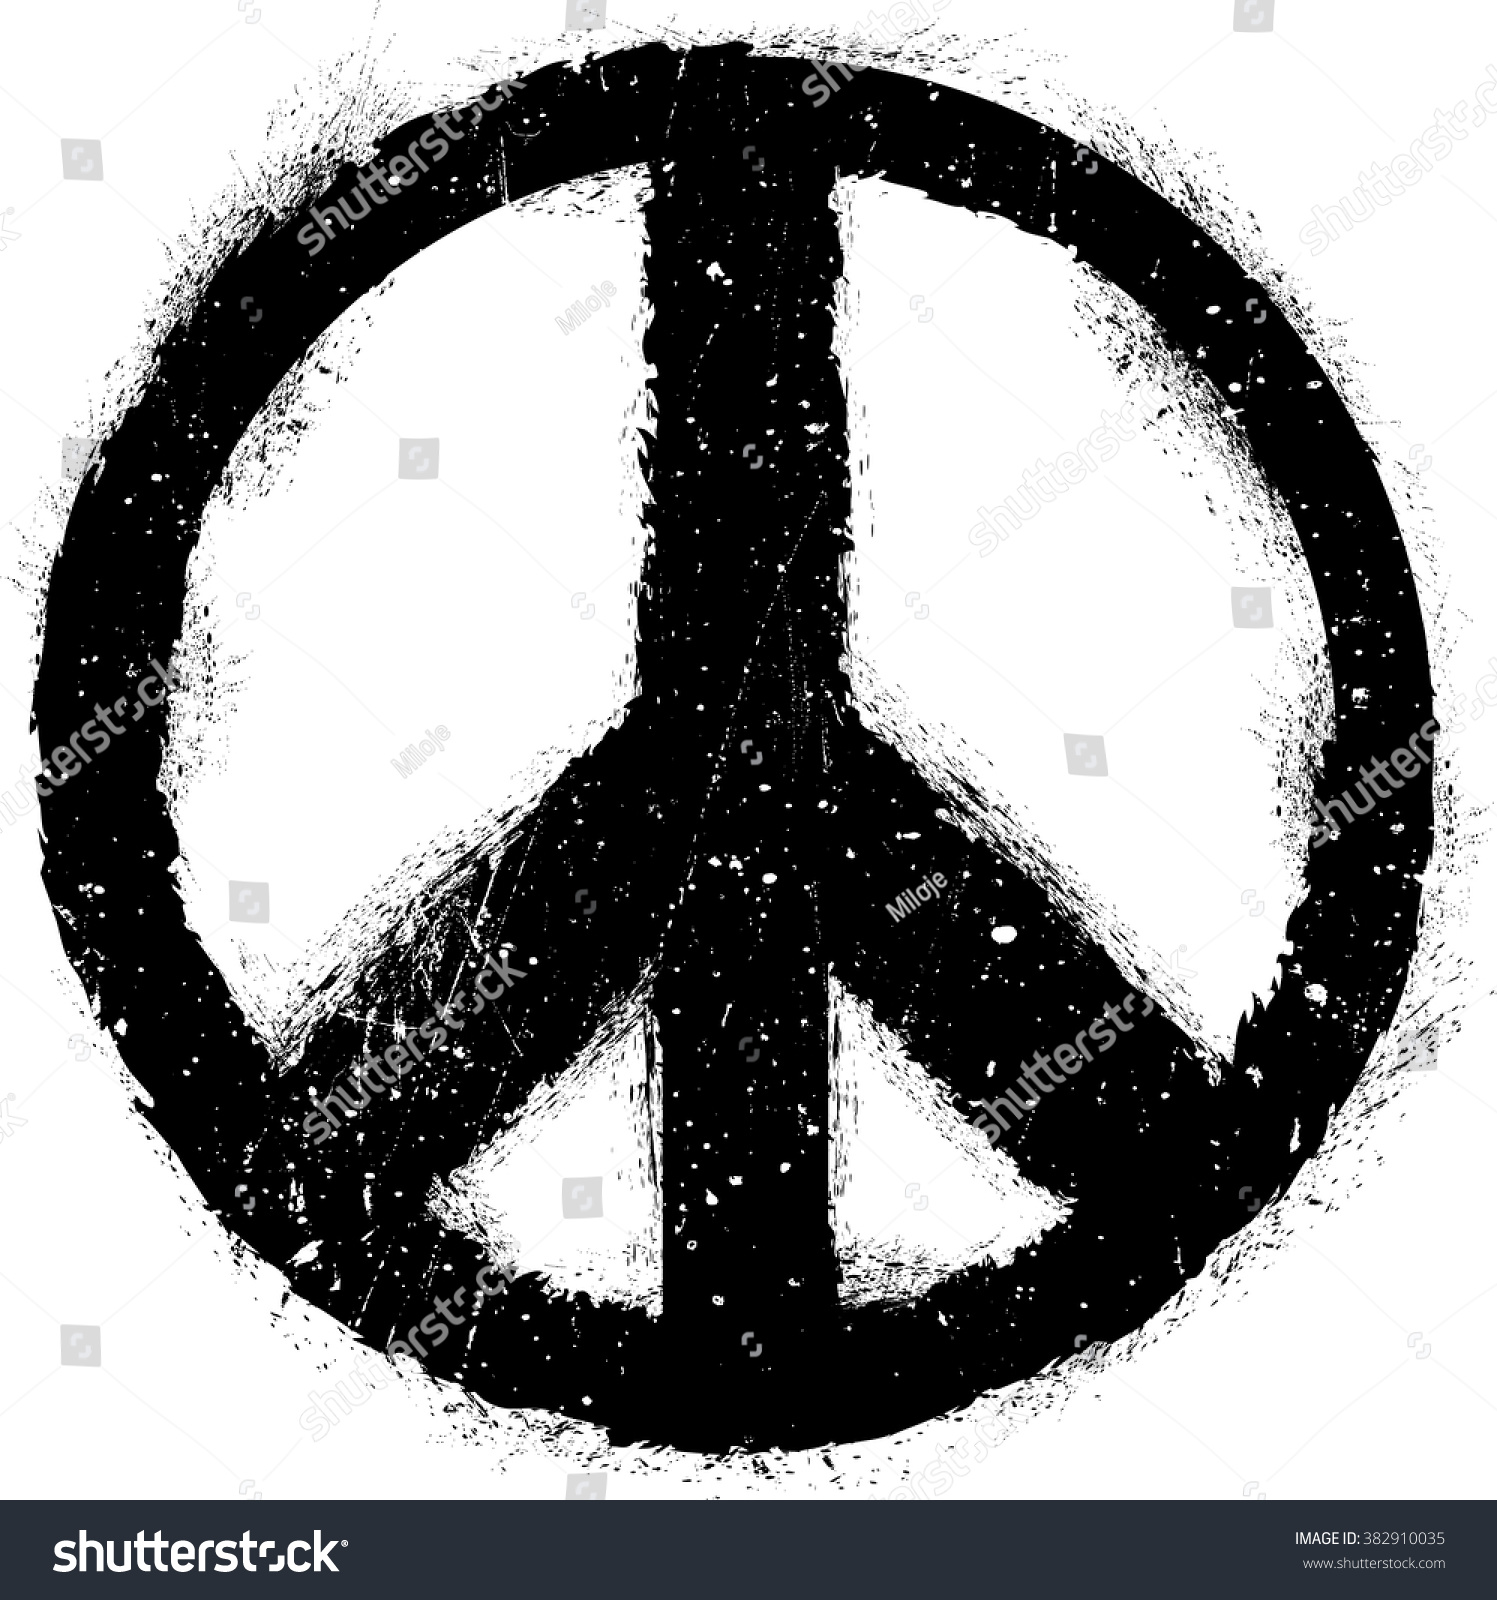 Peace Symbol Vector Grunge Styleelement Your Stock Vector 382910035 ...